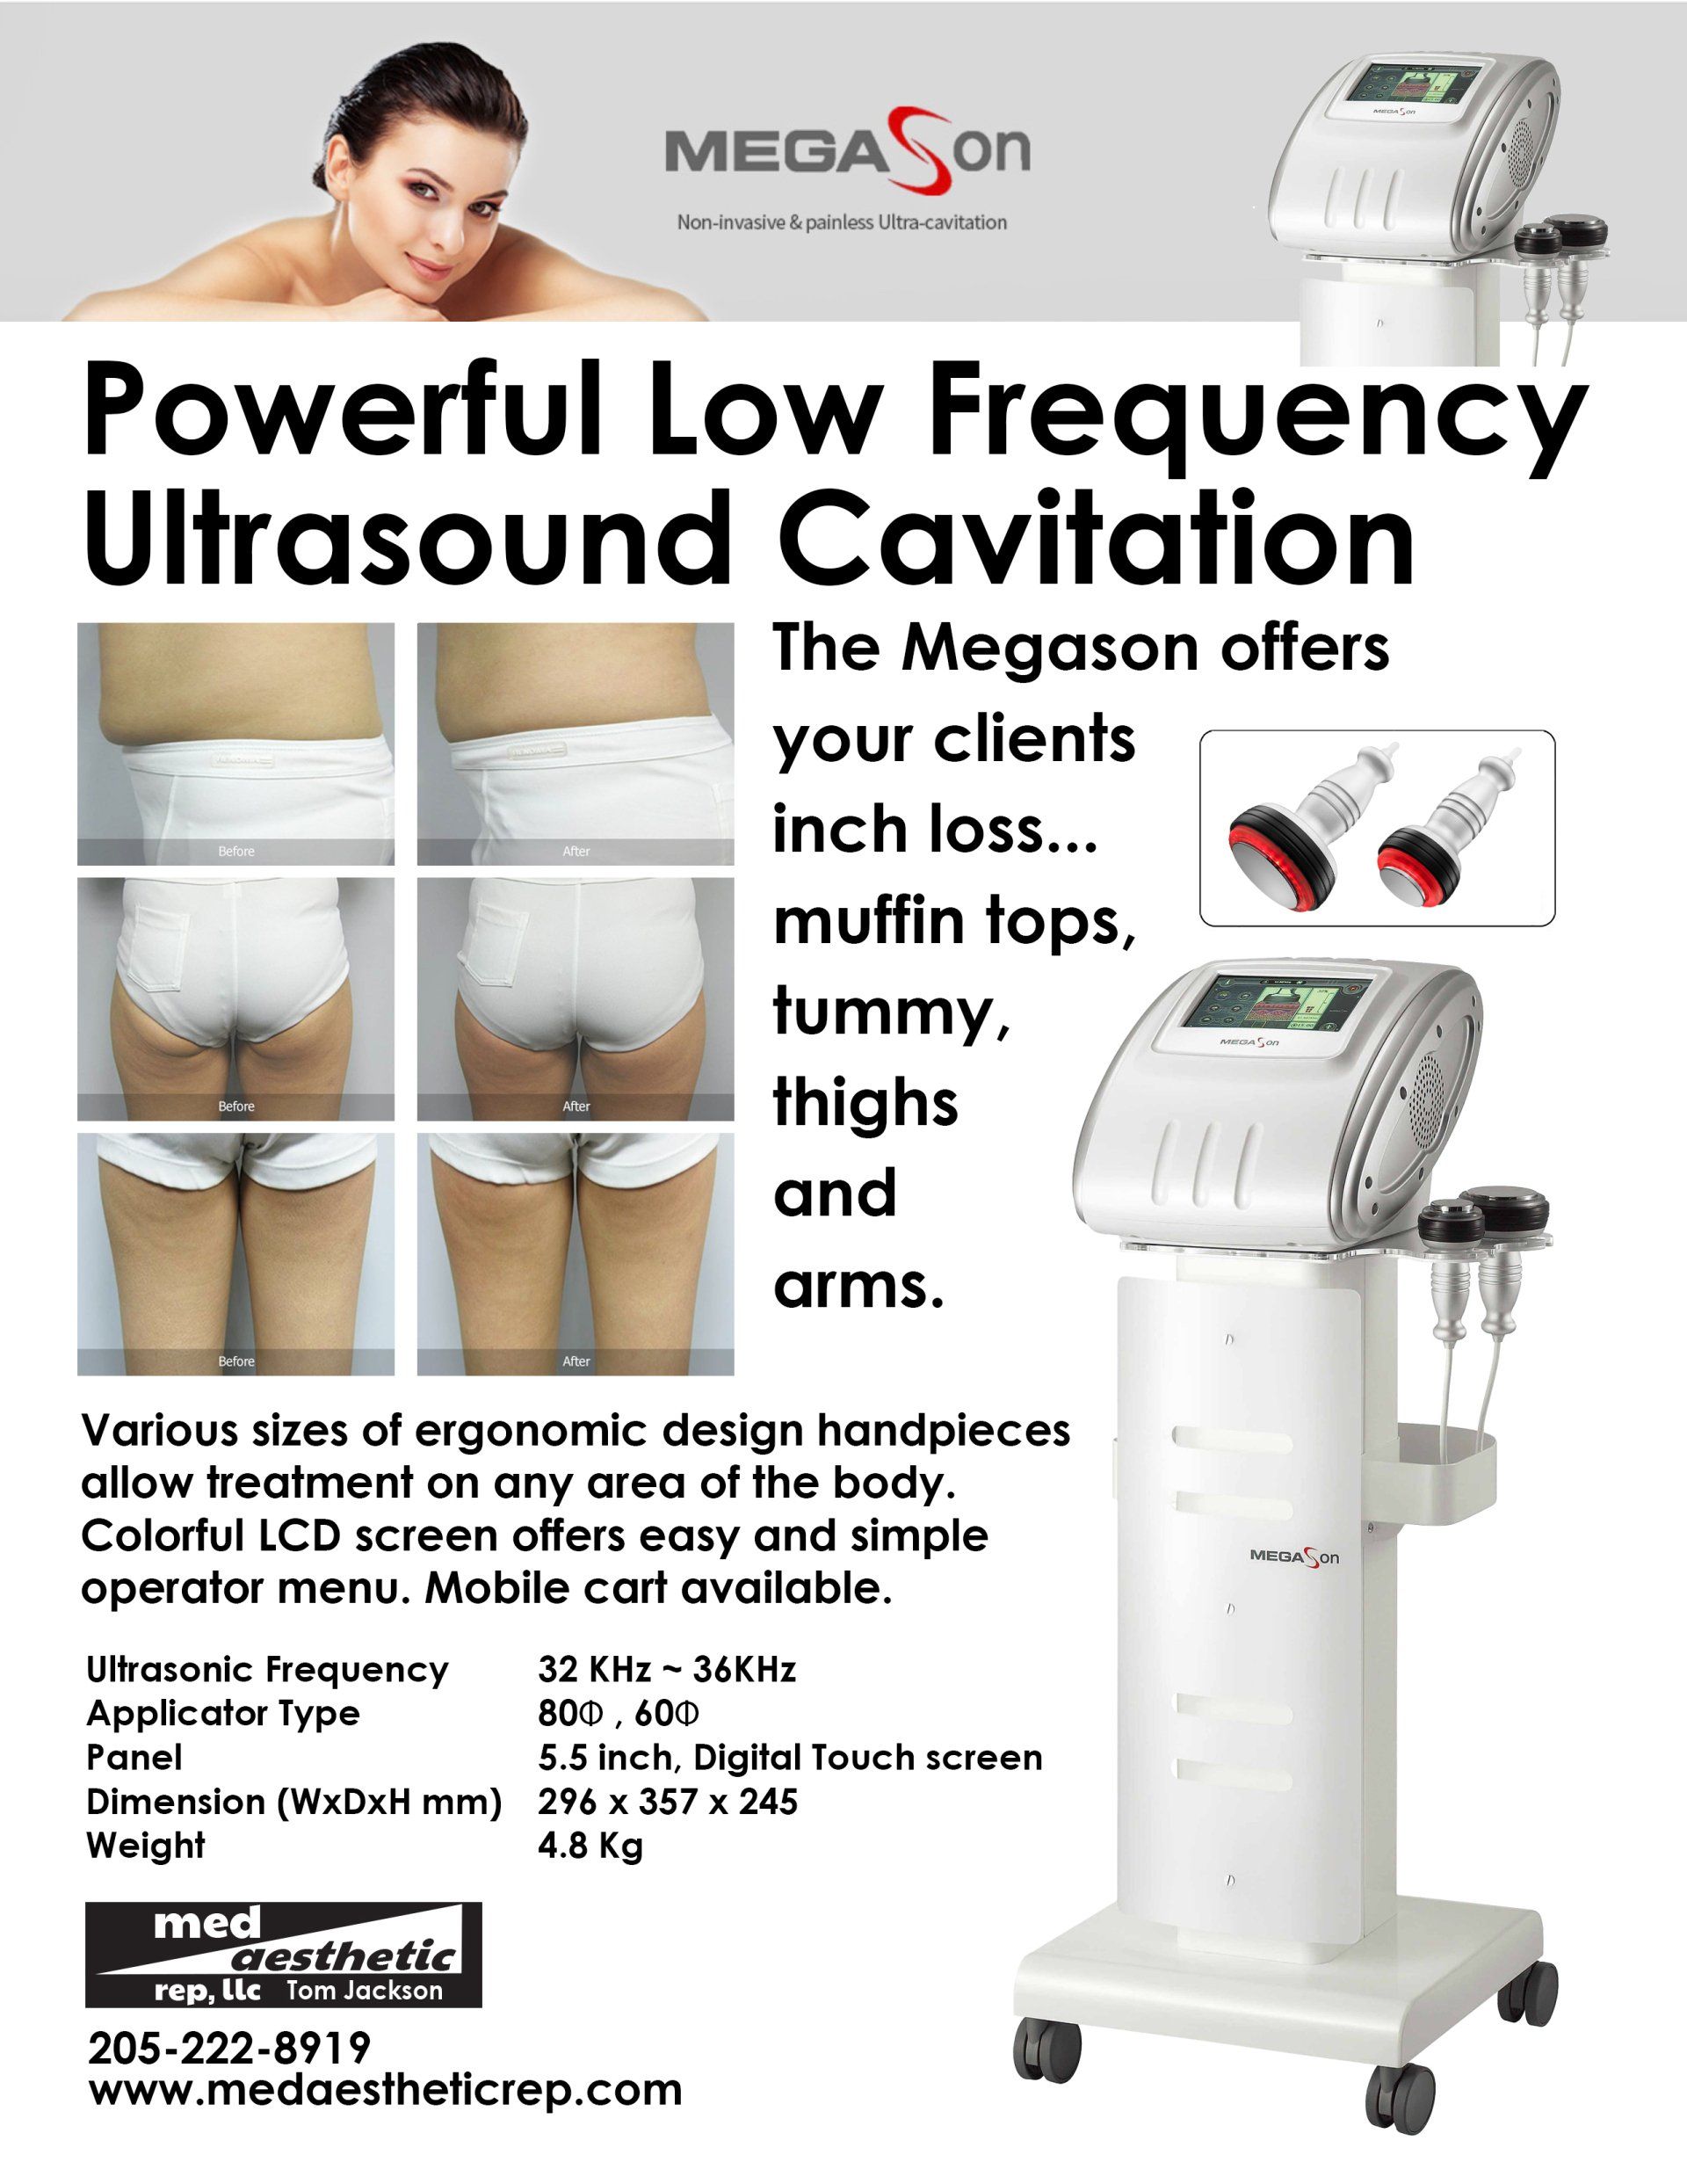 an advertisement for a powerful low frequency ultrasound cavitation machine